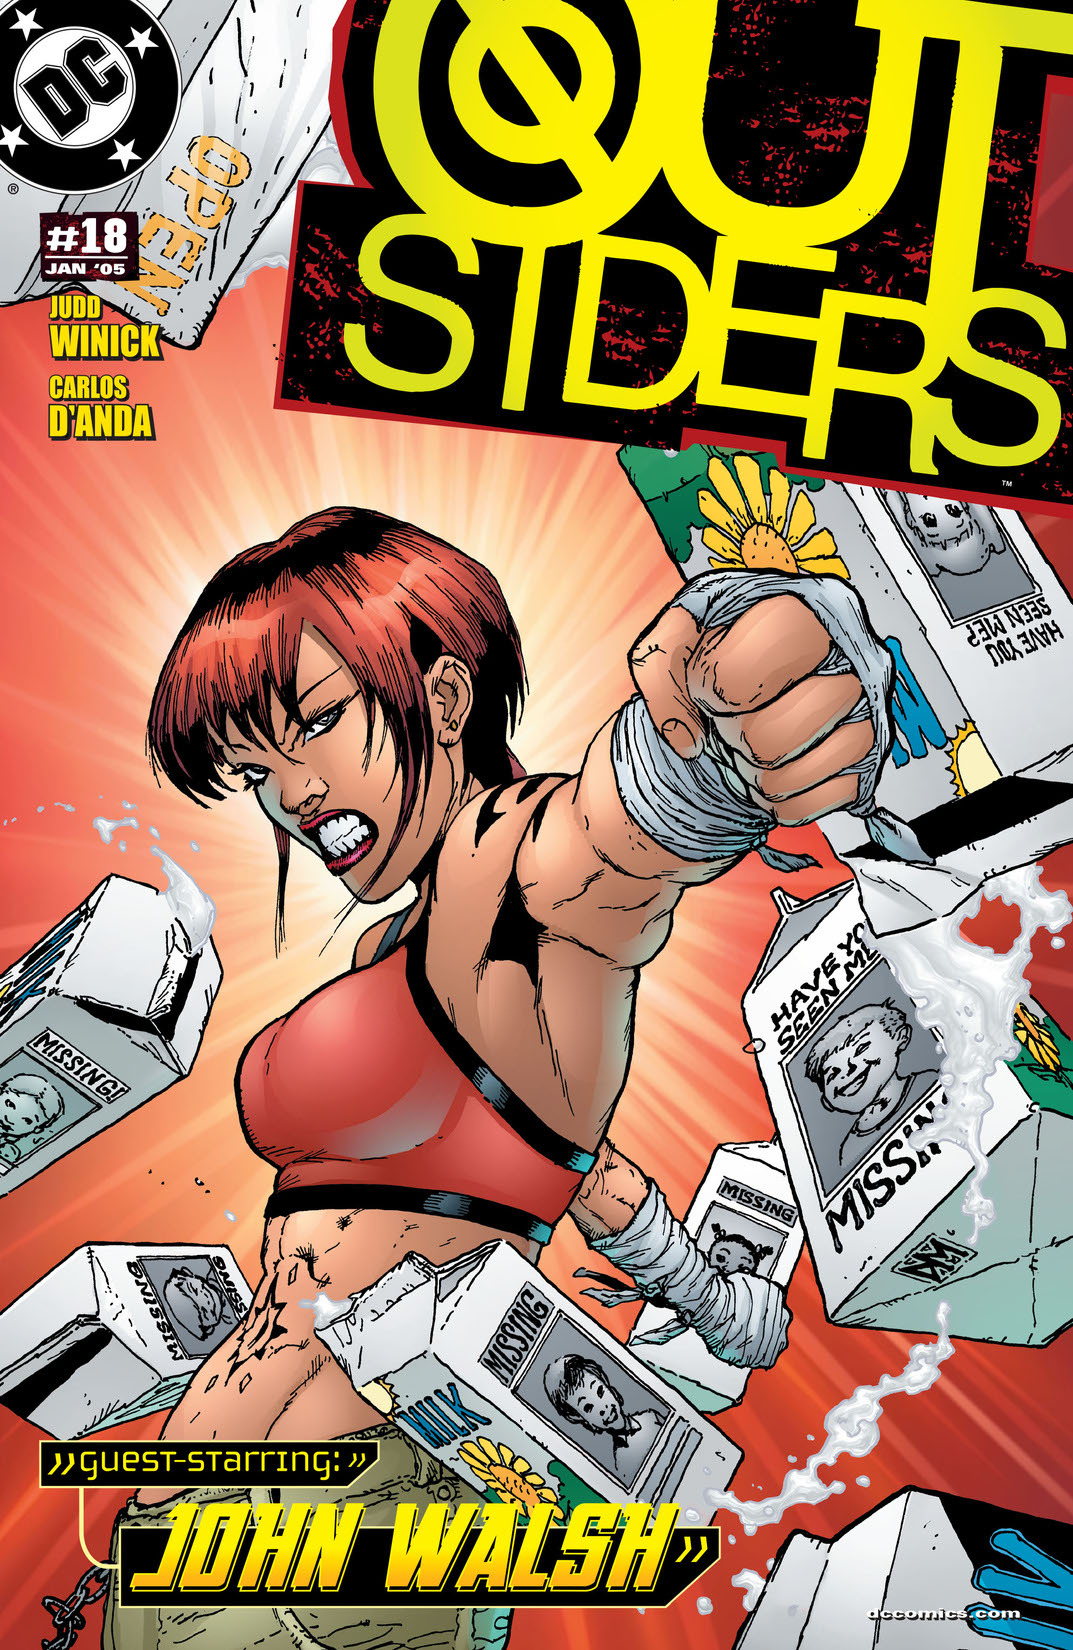 Outsiders (2003-) #18 preview images